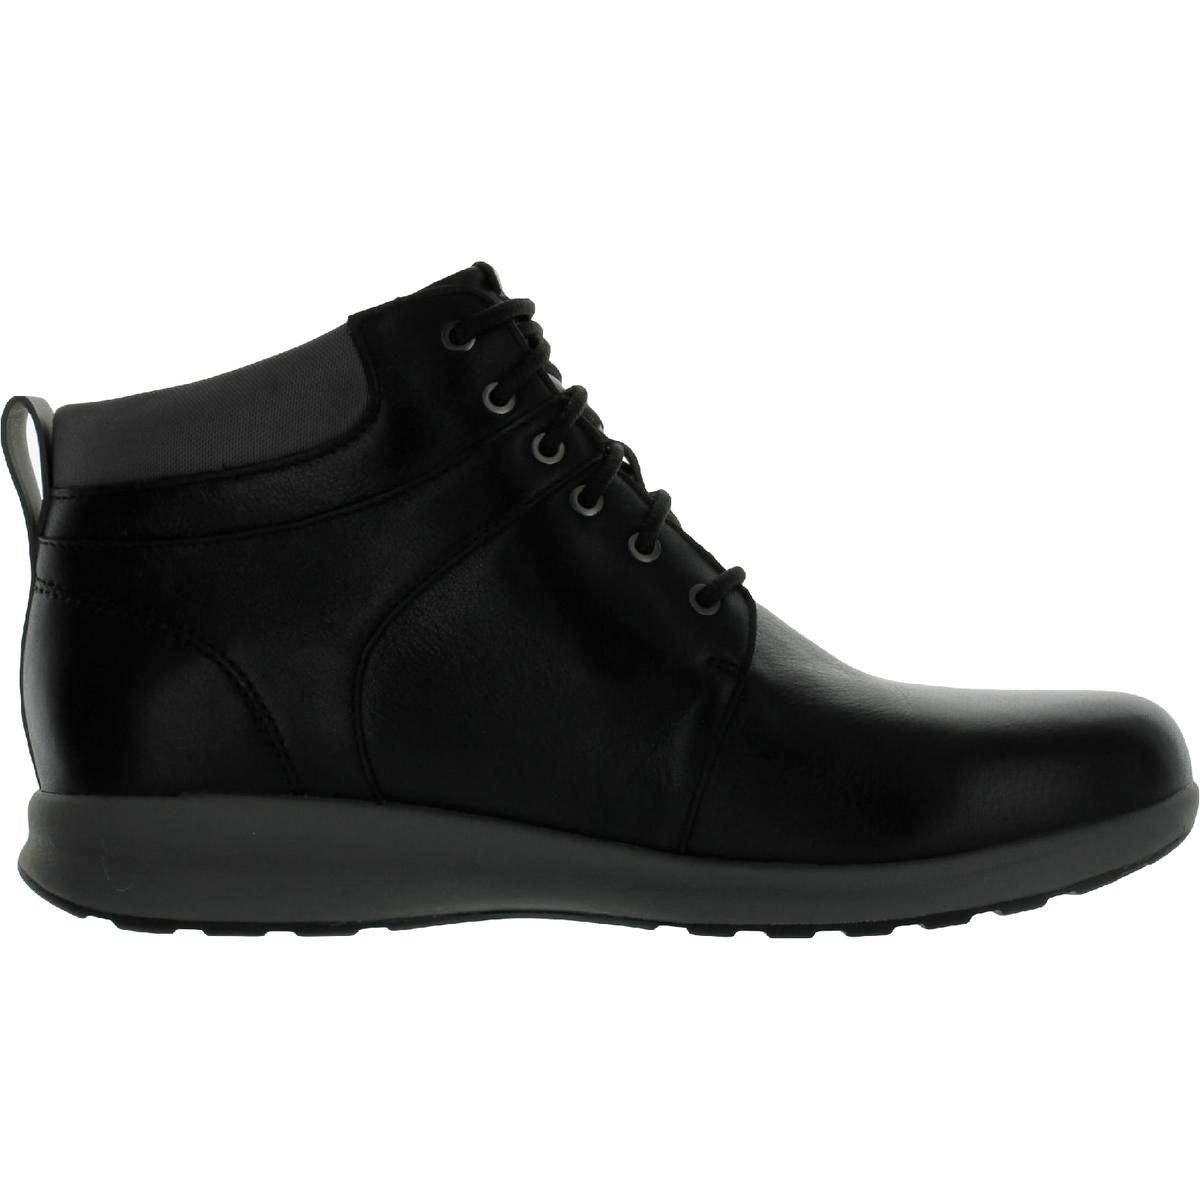 Clarks Un Adorn Walk Leather Round Toe Ankle Boots in Black | Lyst